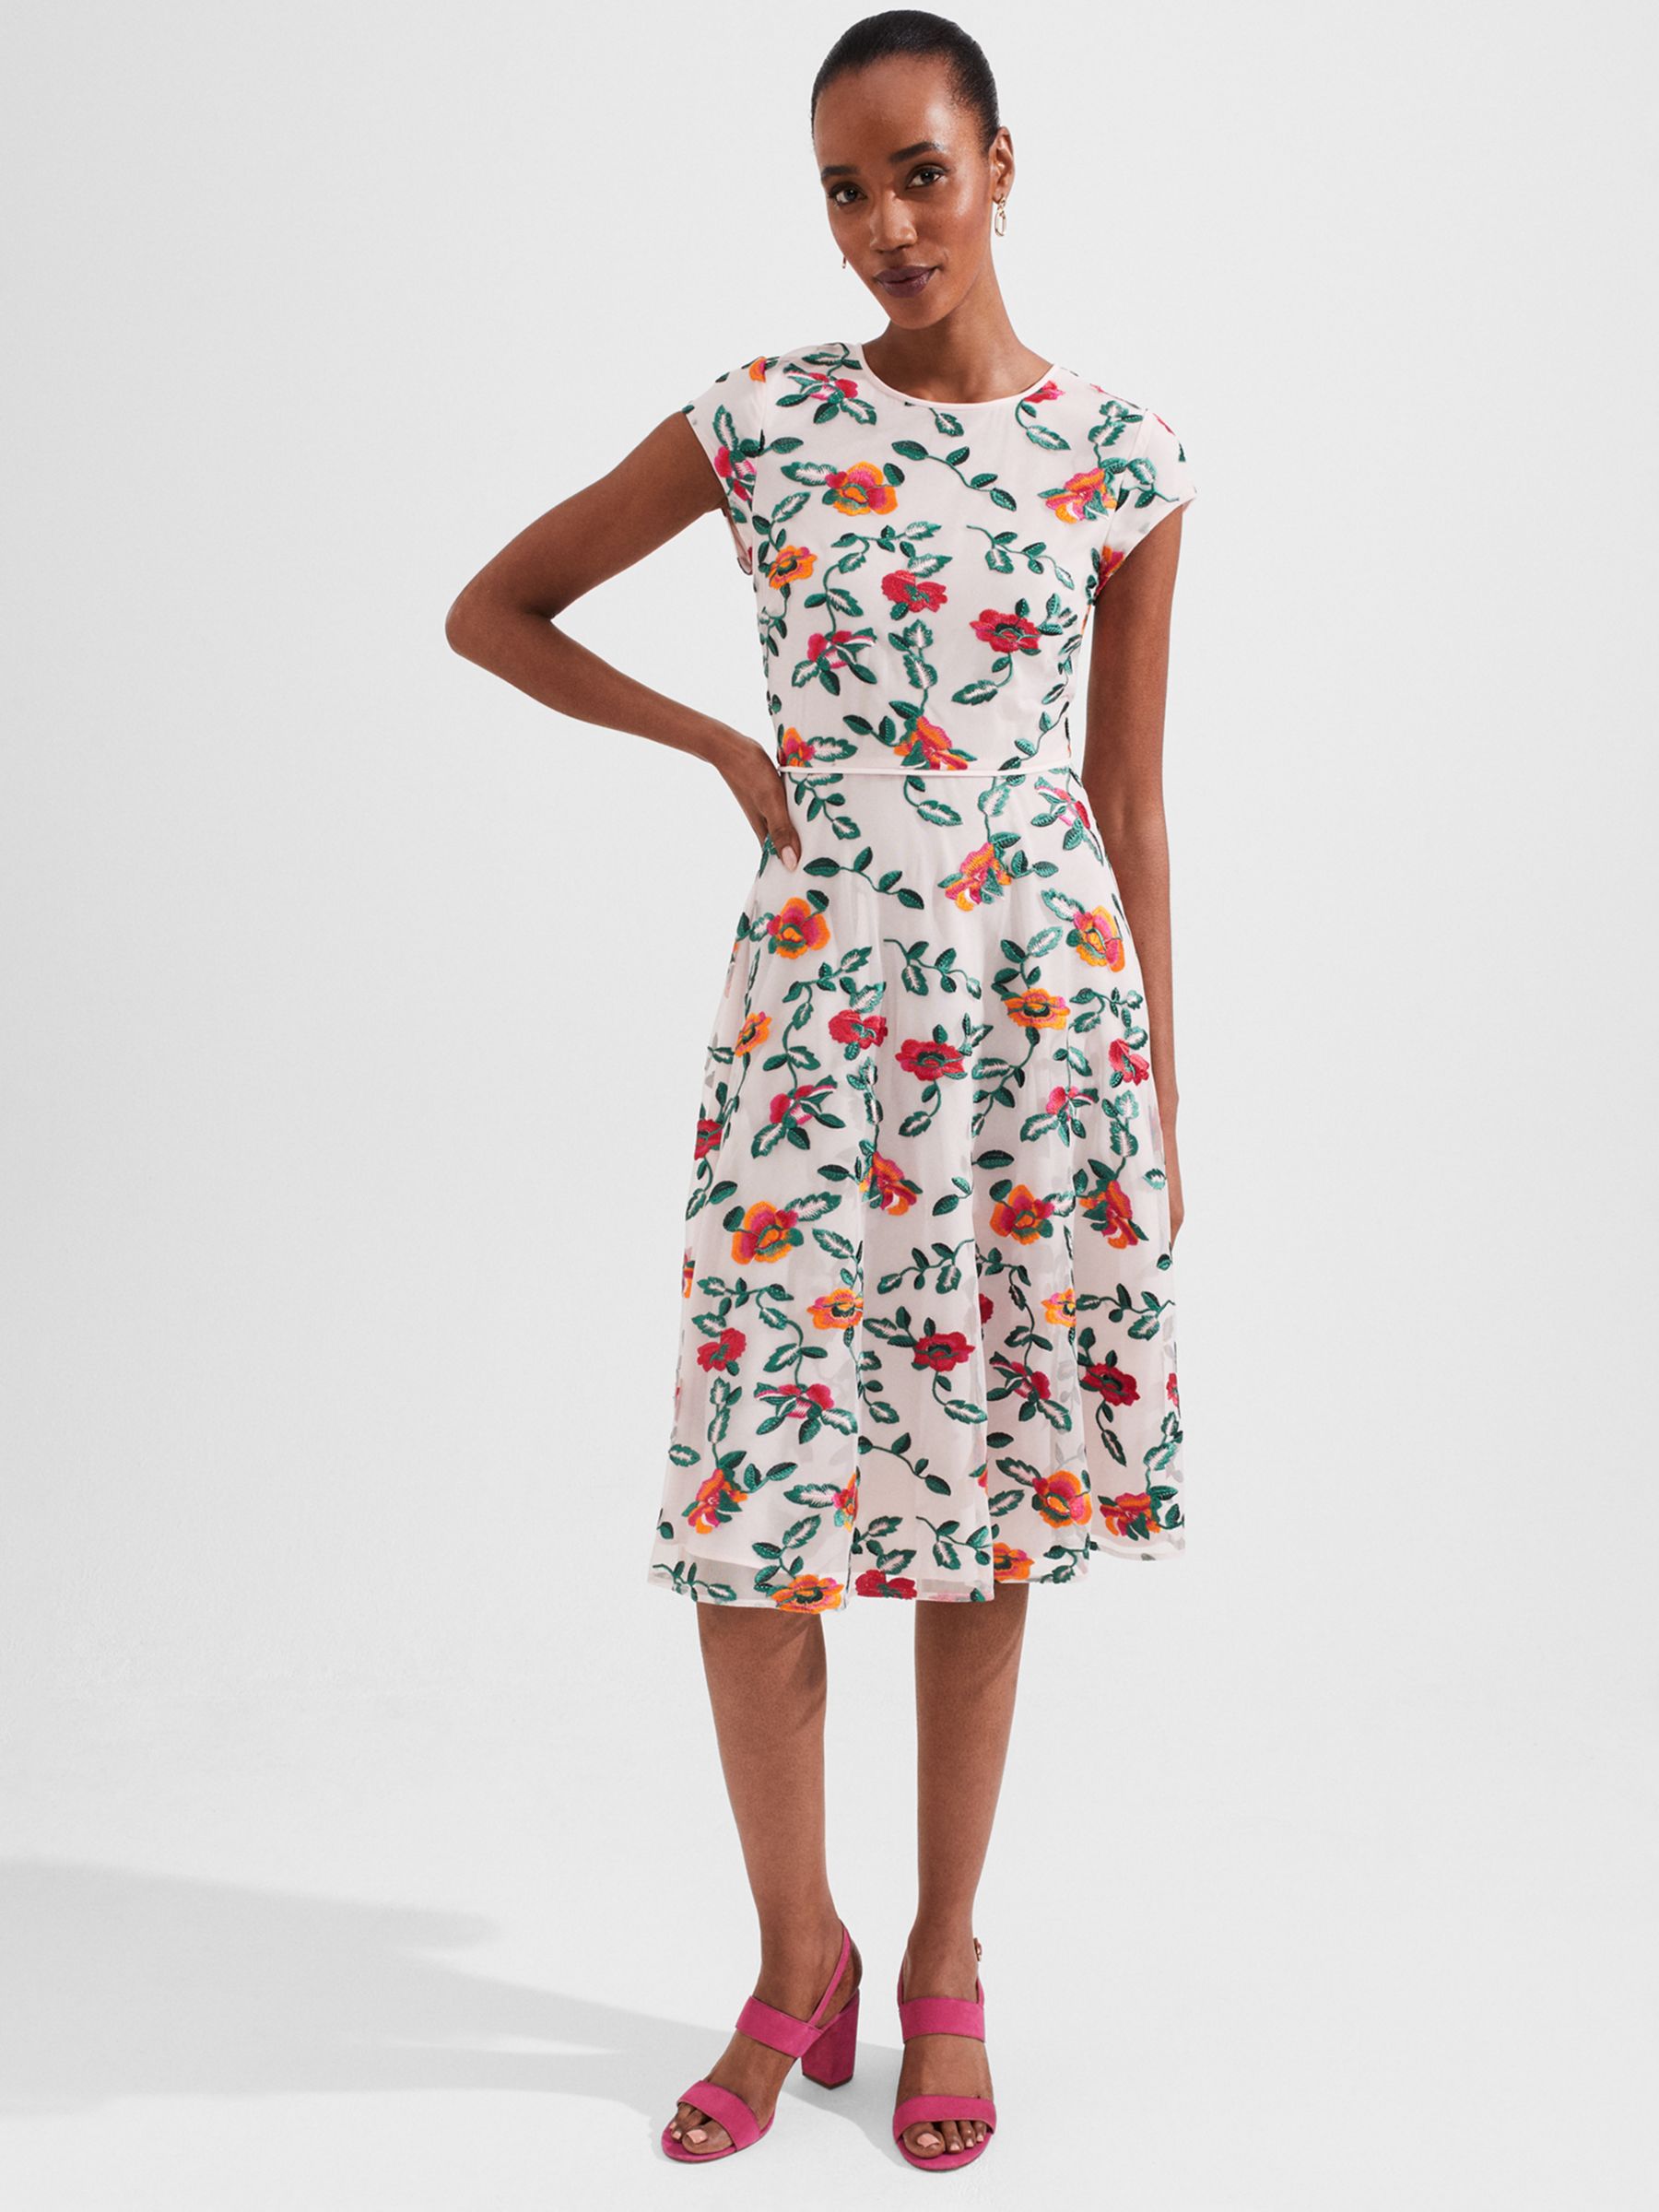 Hobbs Tia Embroidered Dress, Pale Pink at John Lewis & Partners